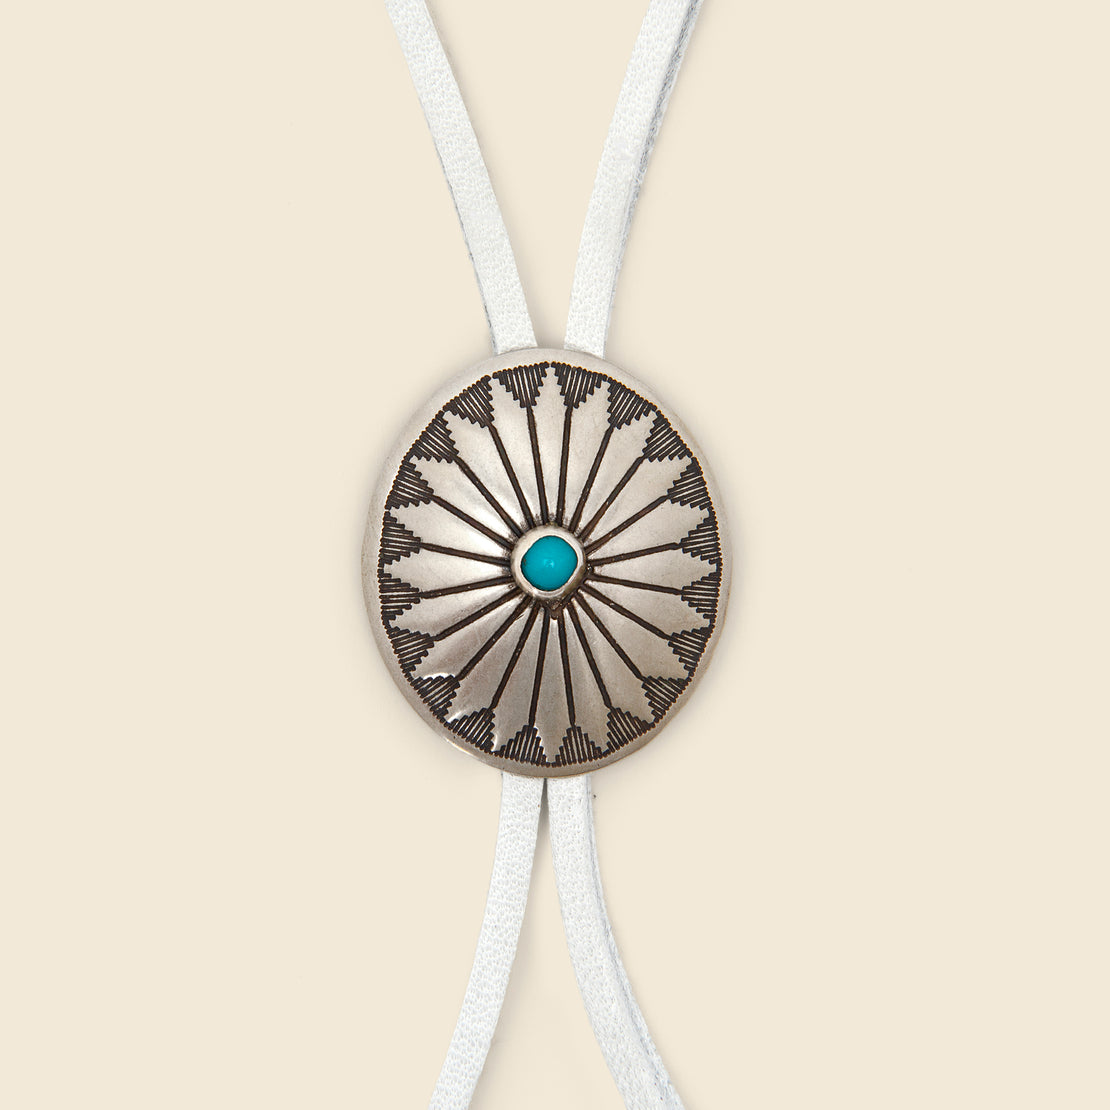 Leather Bolo Tie - White/Turquoise Flower Concho - Yuketen - STAG Provisions - W - Accessories - Necklace